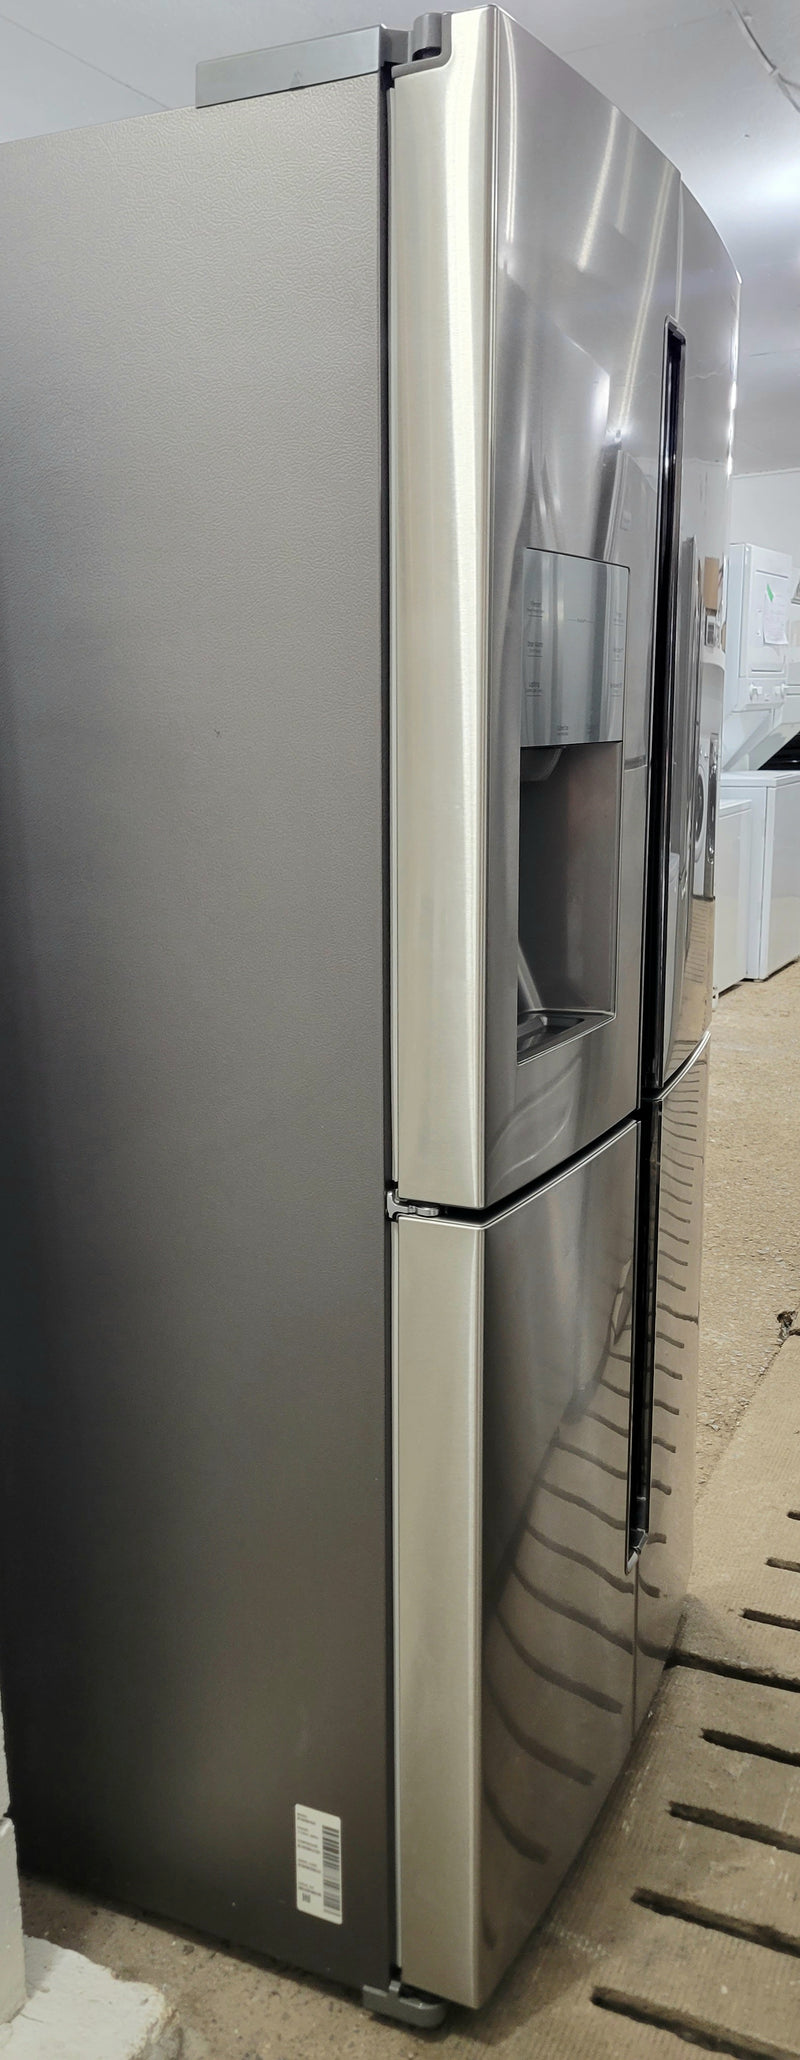 Samsung 36" Wide 4 Door Handleless Fridge with Water and Ice, Free 60 Day Warranty